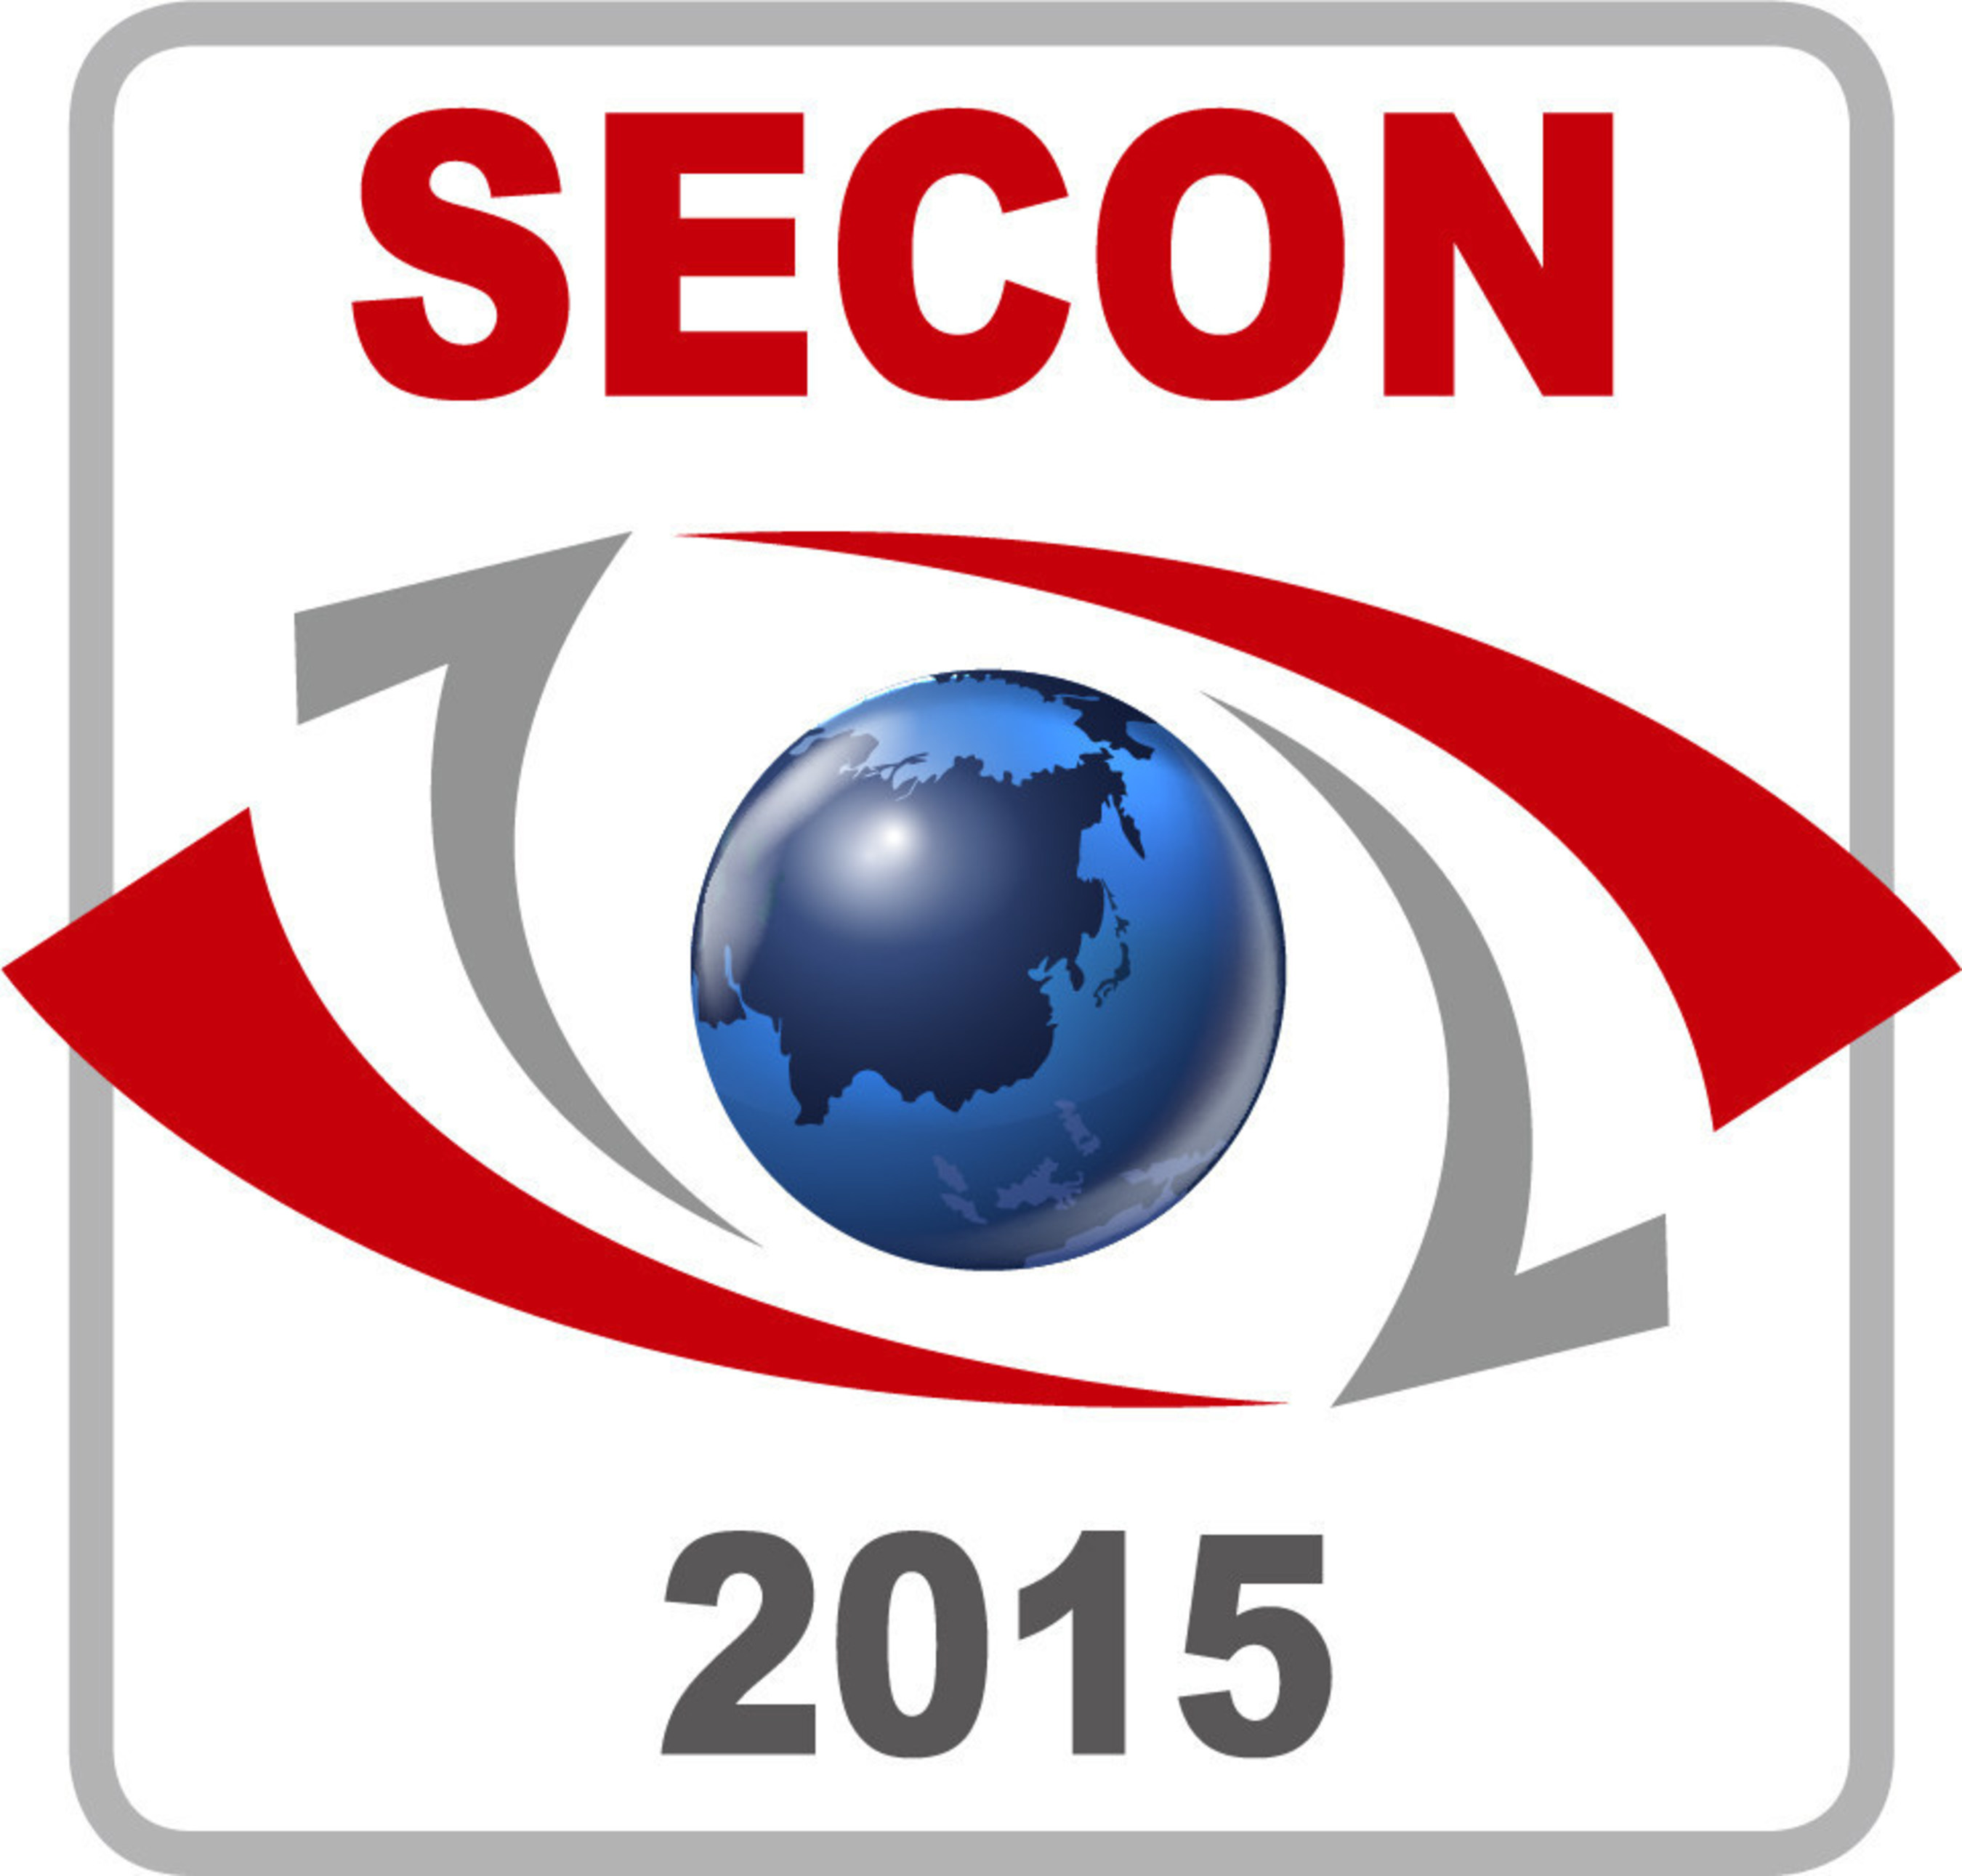 SECON 2015 to be held in March 2015, Ilsan, Korea